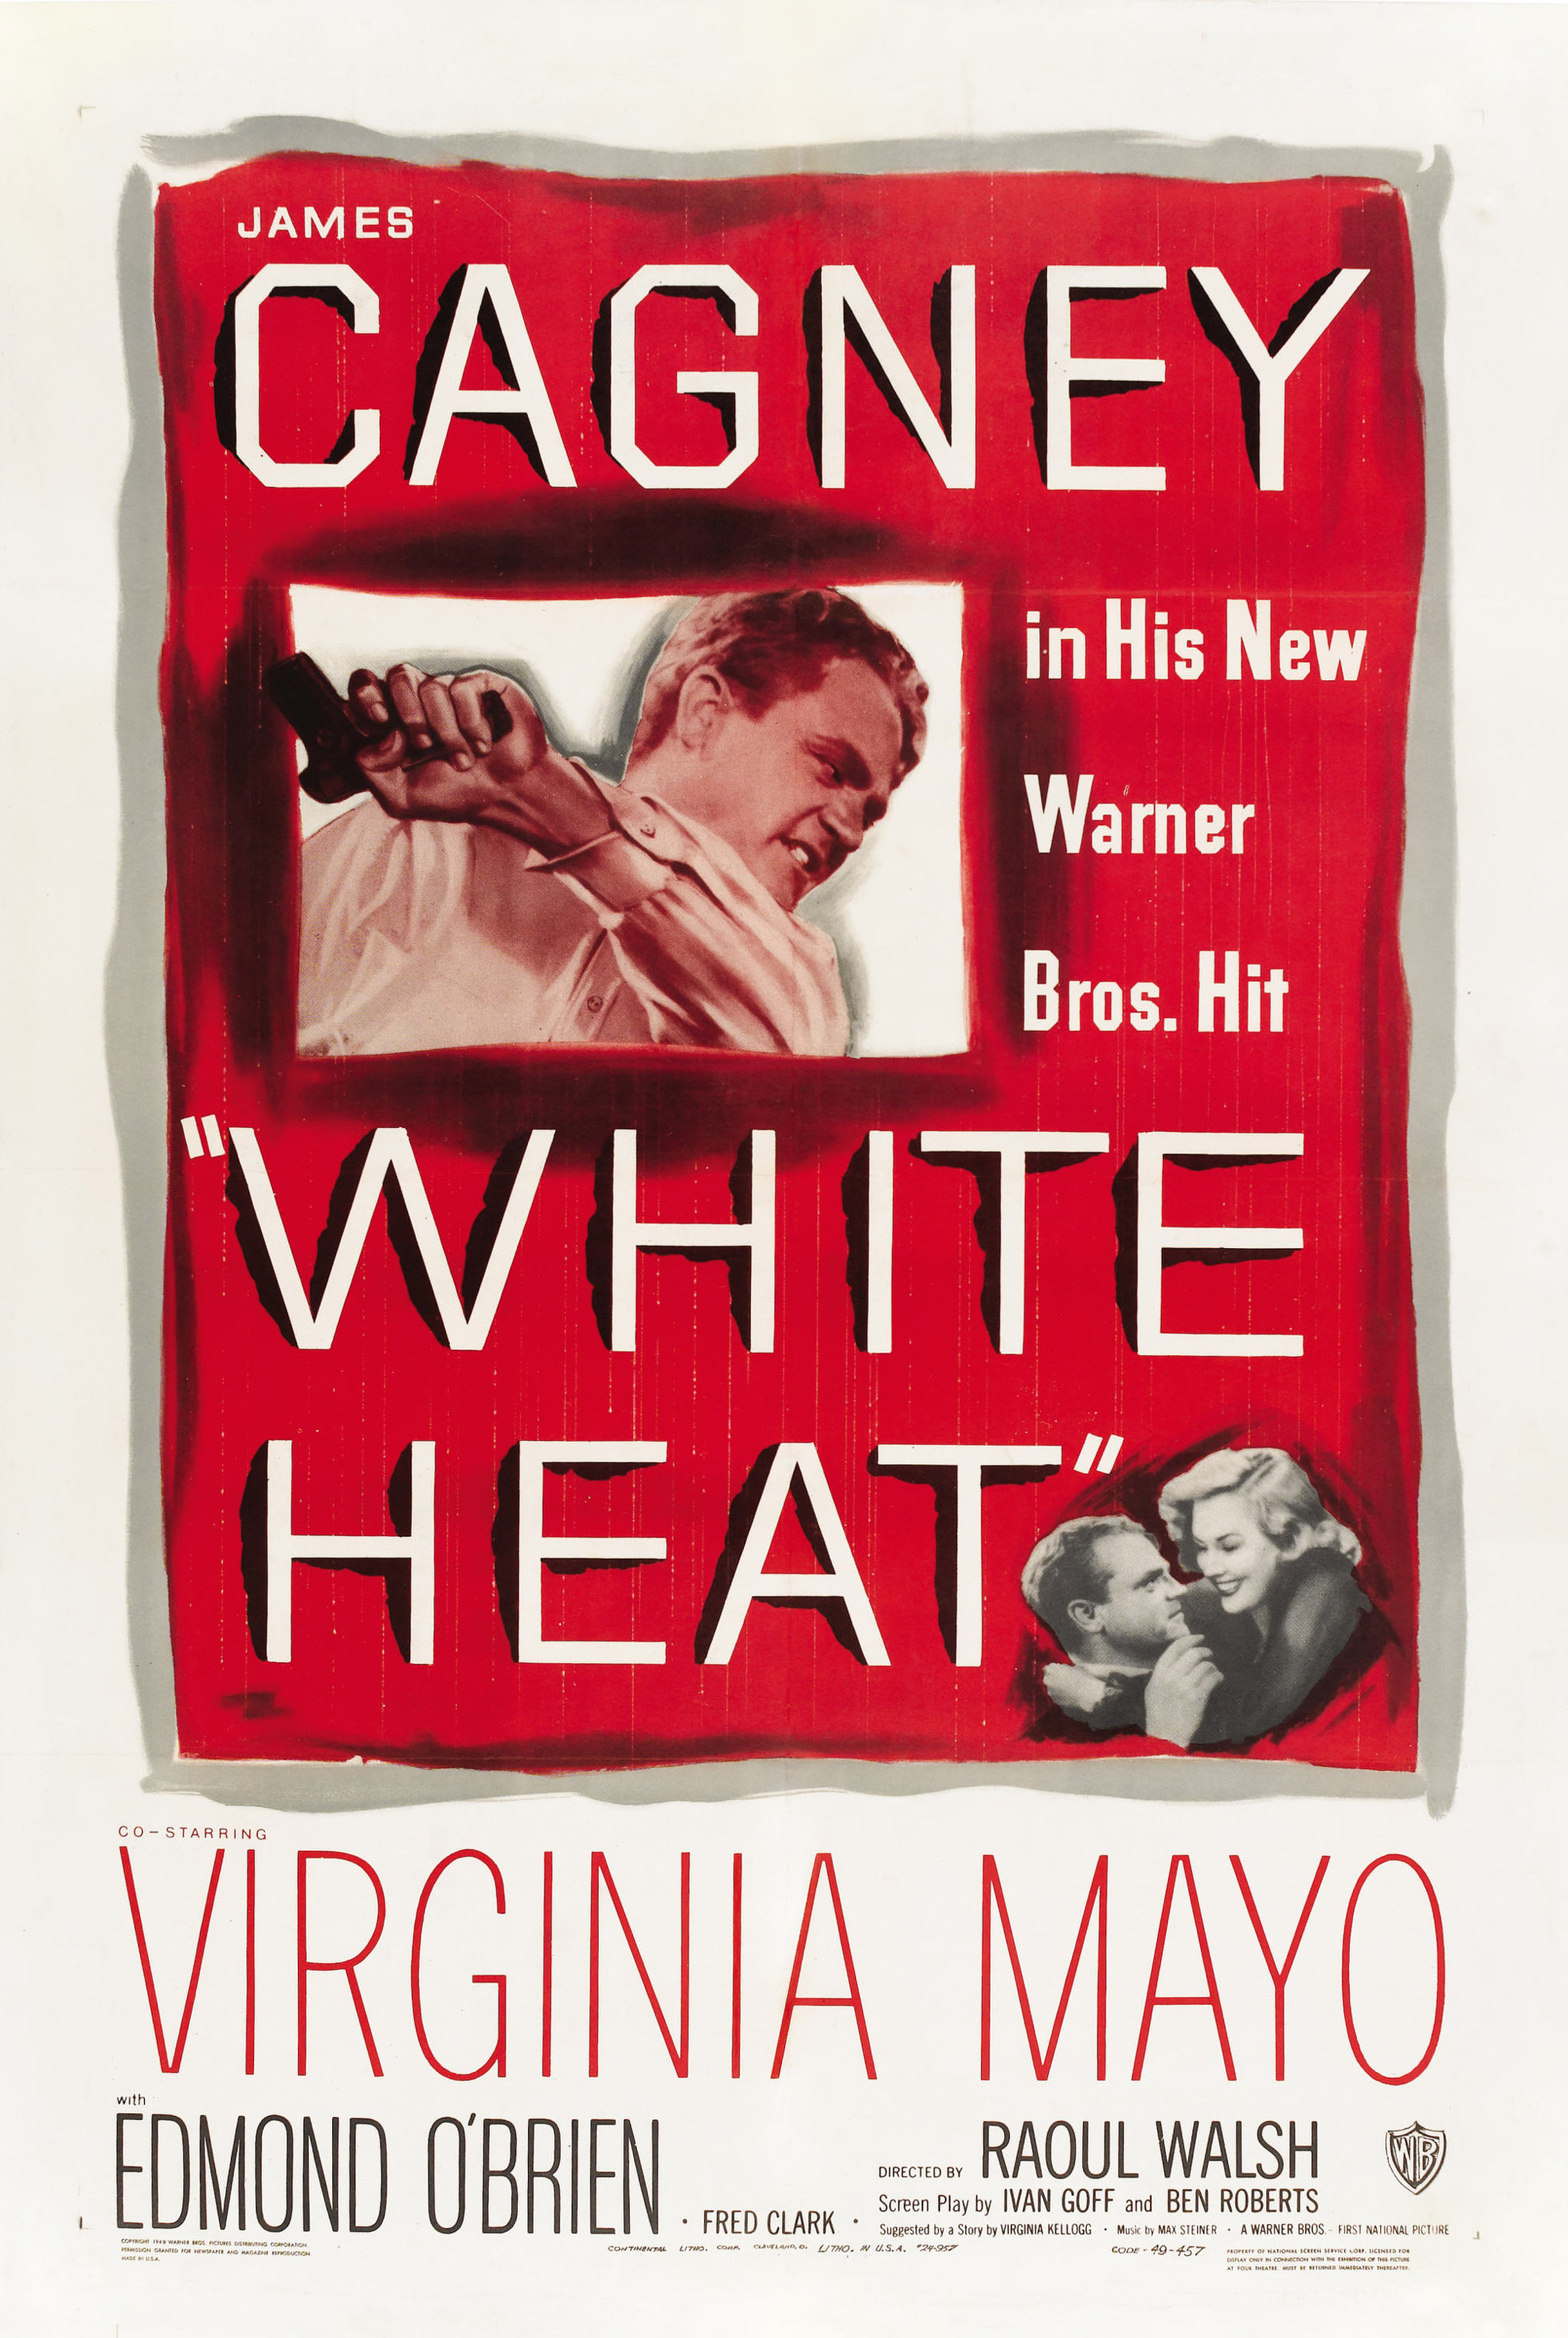 https://static.wikia.nocookie.net/warner-bros-entertainment/images/4/42/White_Heat_%281949_poster%29.jpg/revision/latest?cb=20200823192325